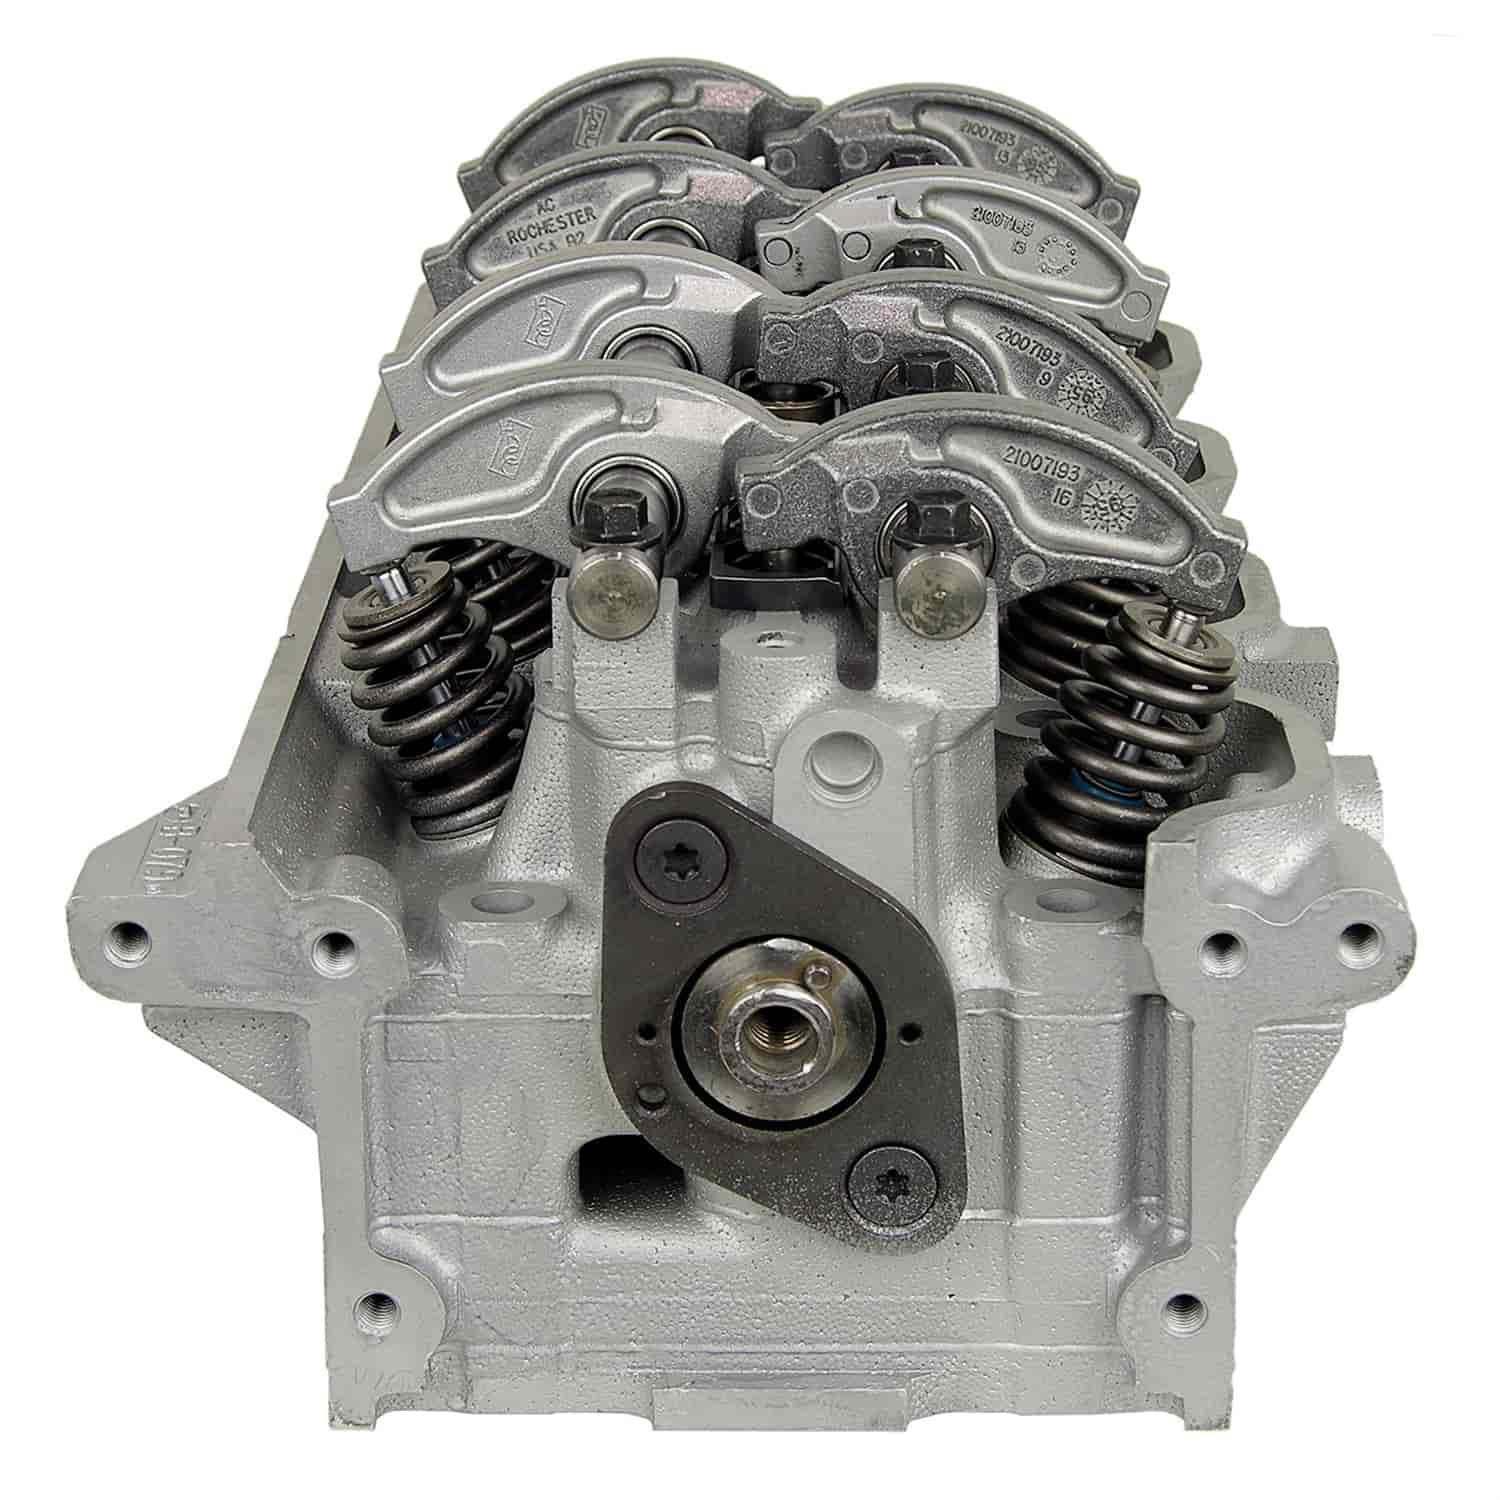 Remanufactured Cylinder Head for 1991-1994 Saturn with SOHC 1.9L L4